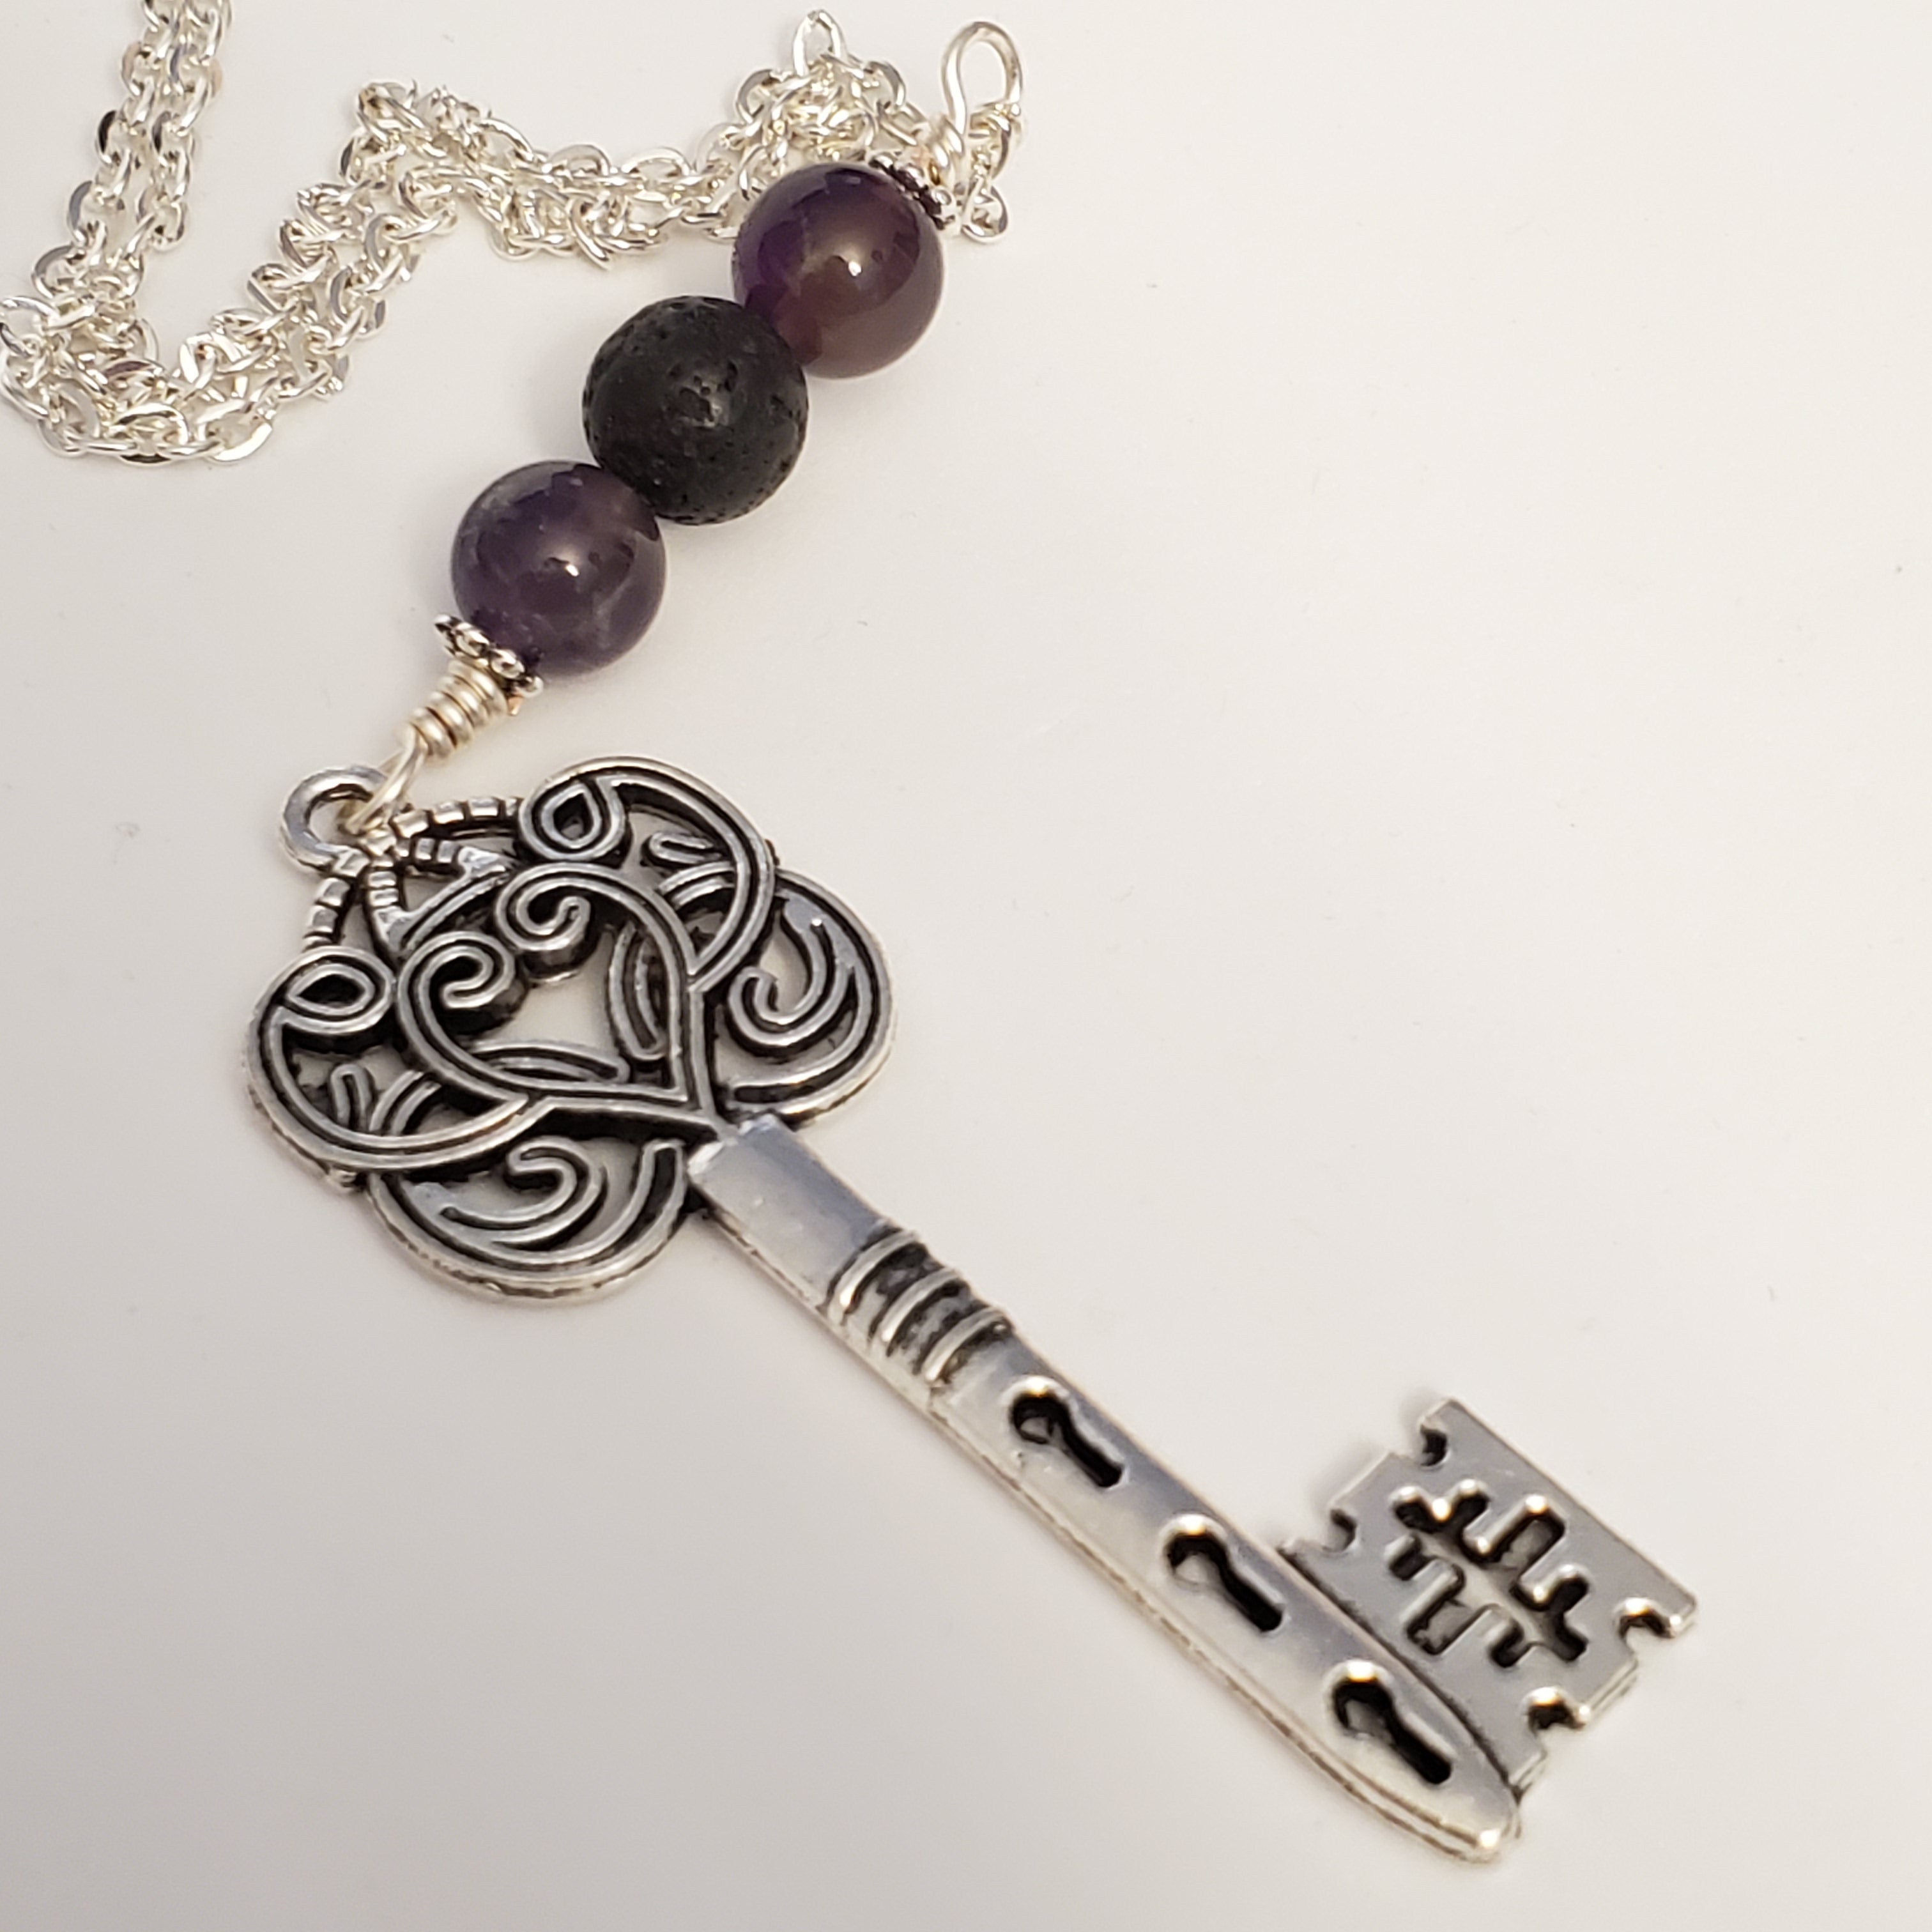 Key with amethyst and lava bead